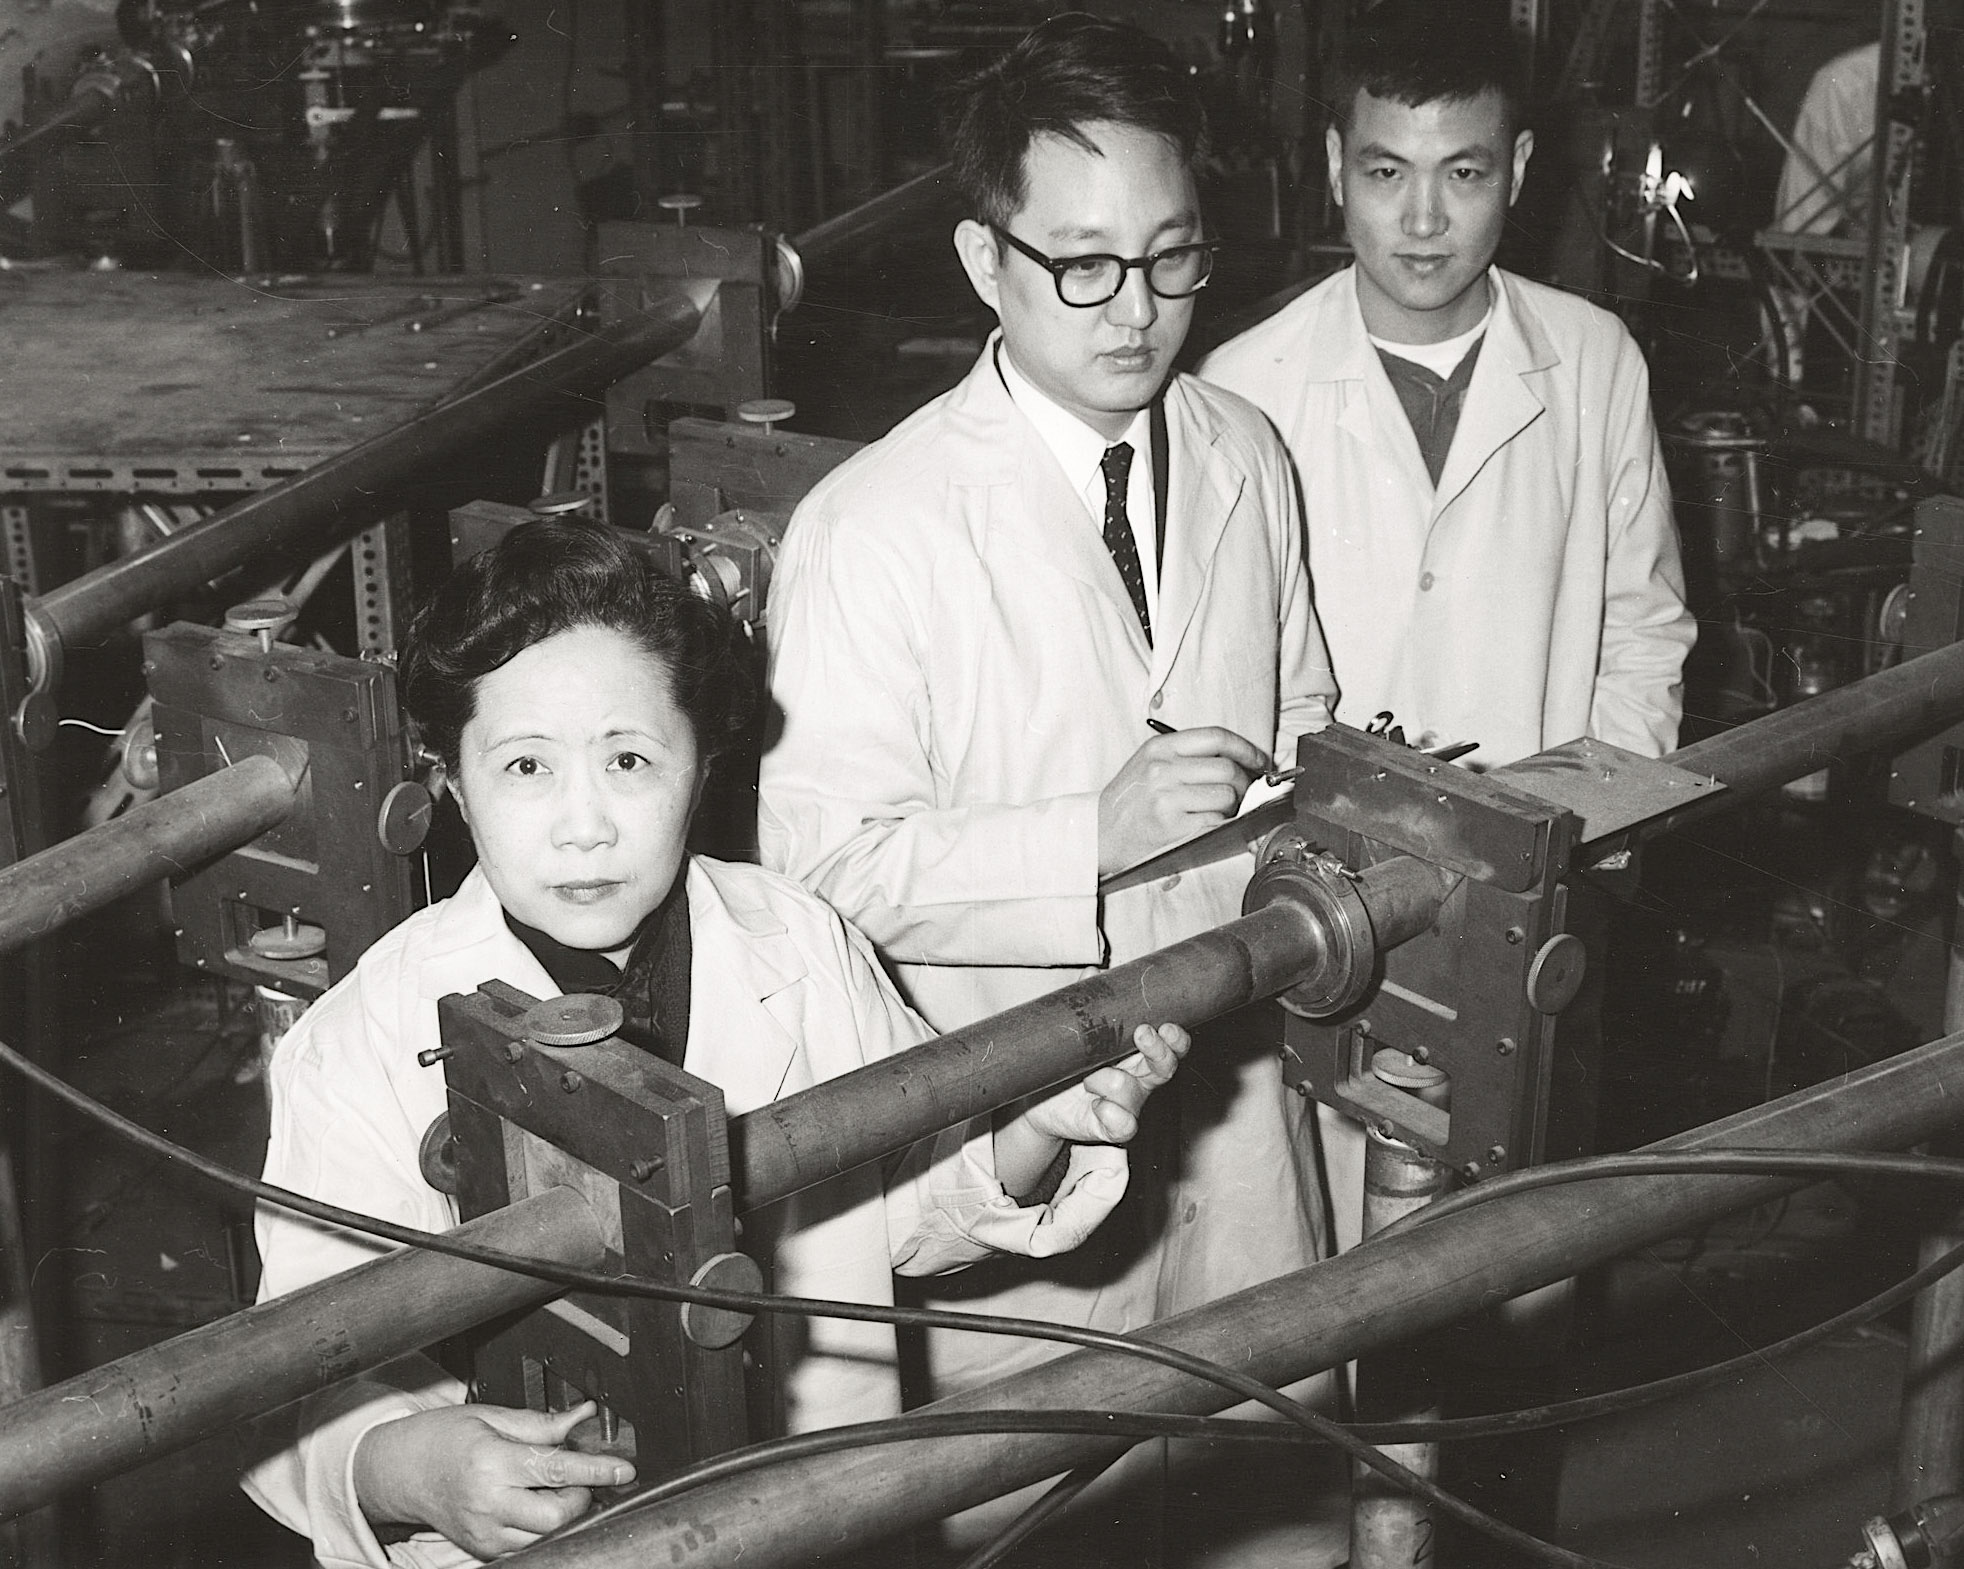 Dr. Chien-Shiung Wu (left) and her associates, Dr. Y.K. Lee and L.W. Mo